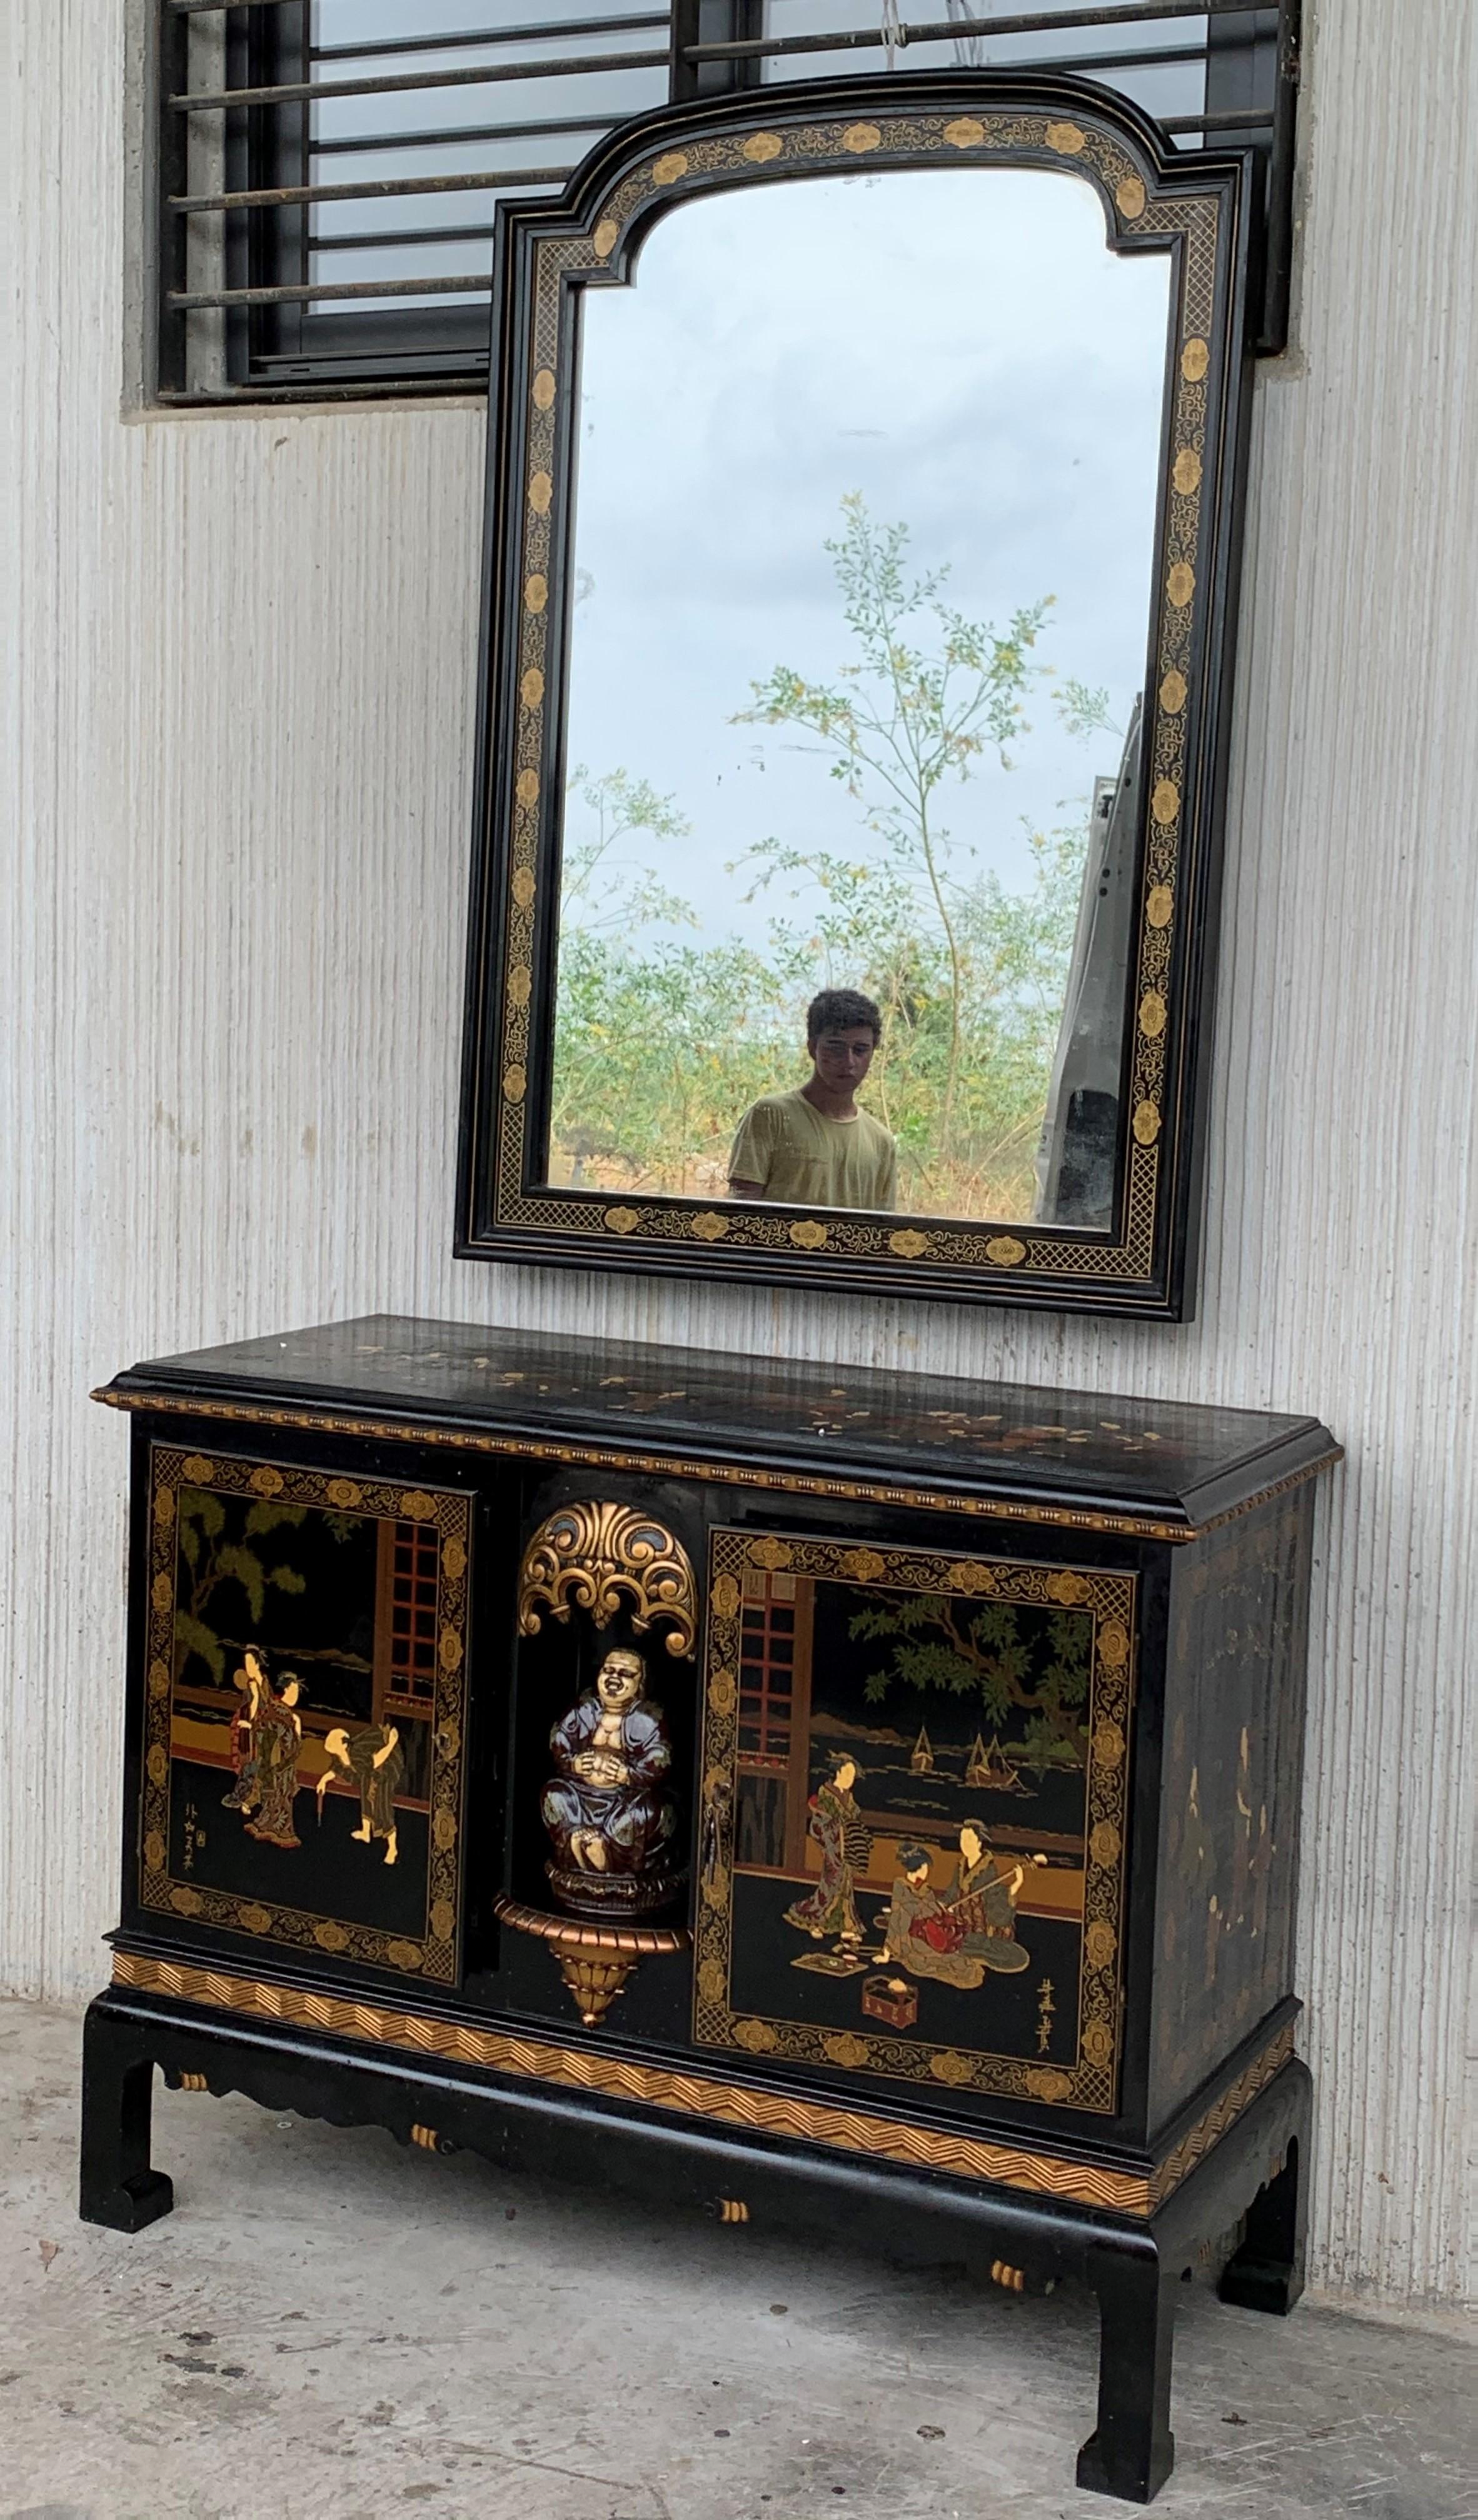 This incomparable chinoiserie black lacquer sideboard depicts figures in various typical traditional scenes. What more can you ask for really? As if that's not enough, there's plenty of traditional hand painted Asian motif from head to toe. The reds